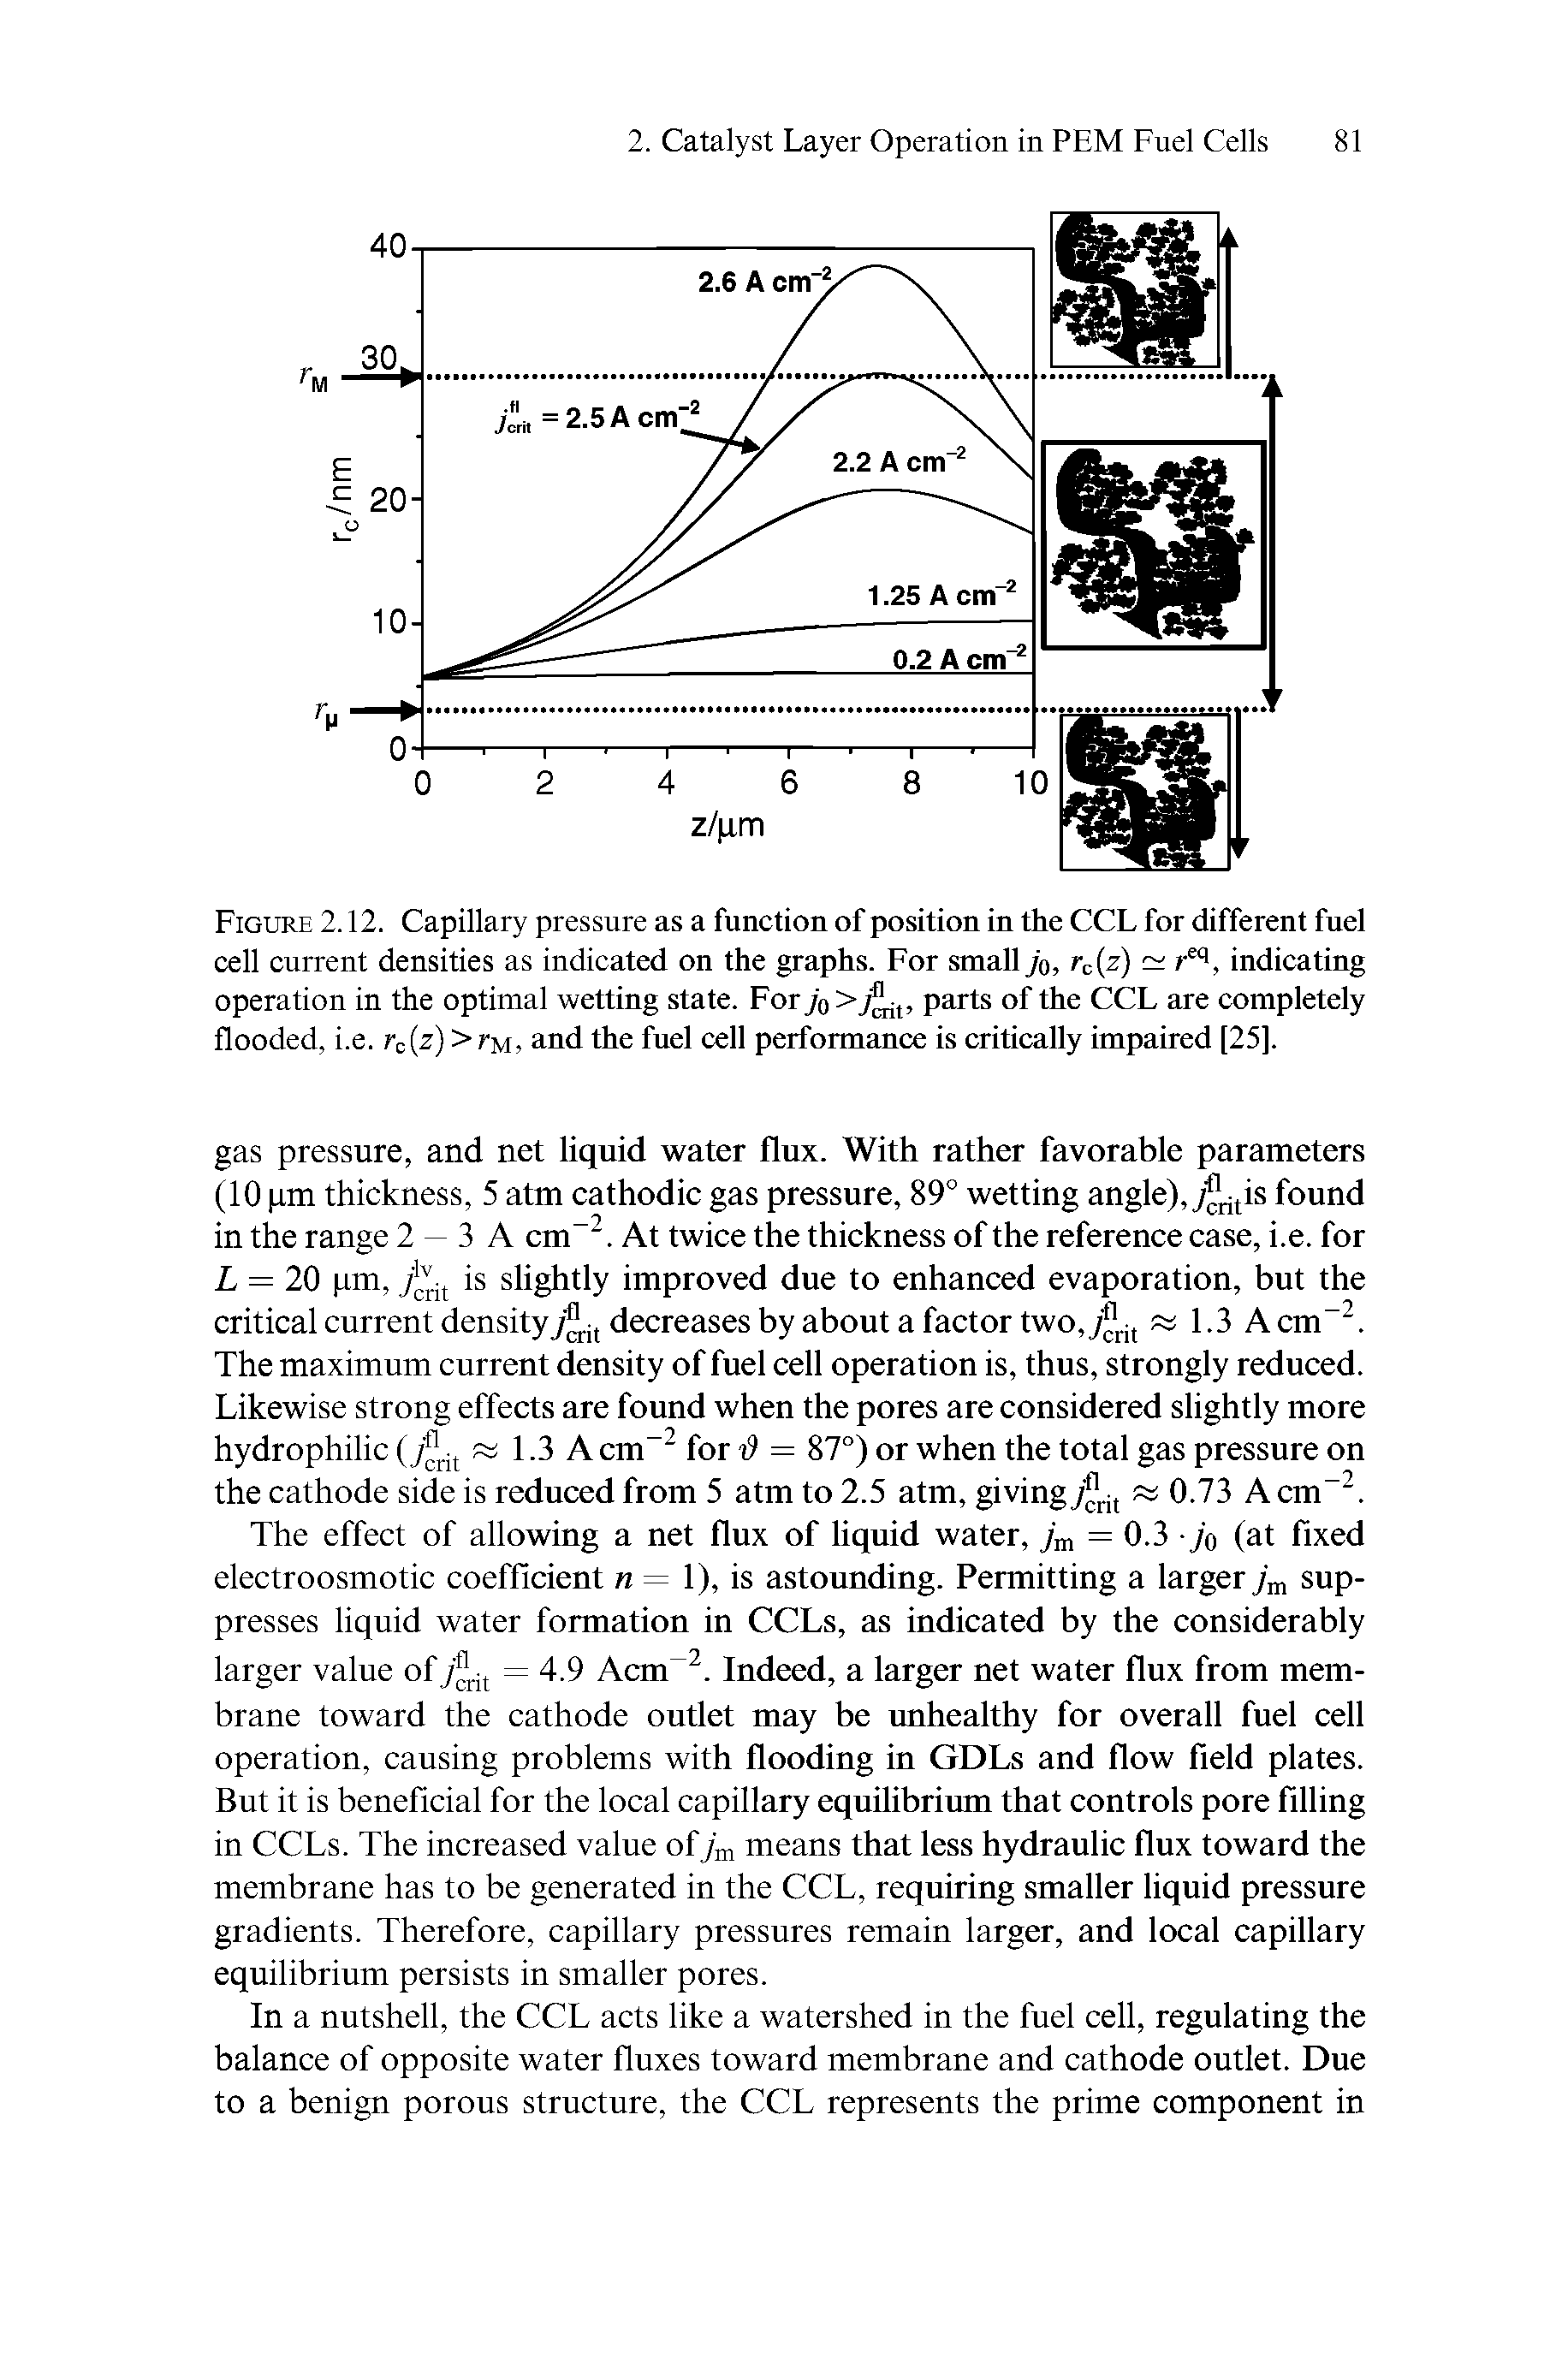 Figure 2.12. Capillary pressure as a function of position in the CCL for different fuel cell current densities as indicated on the graphs. For small jo, Tc z) indicating operation in the optimal wetting state. For jo >parts of the CCL are completely flooded, i.e. r z)>ryi, and the fuel cell performance is critically impaired [25],...